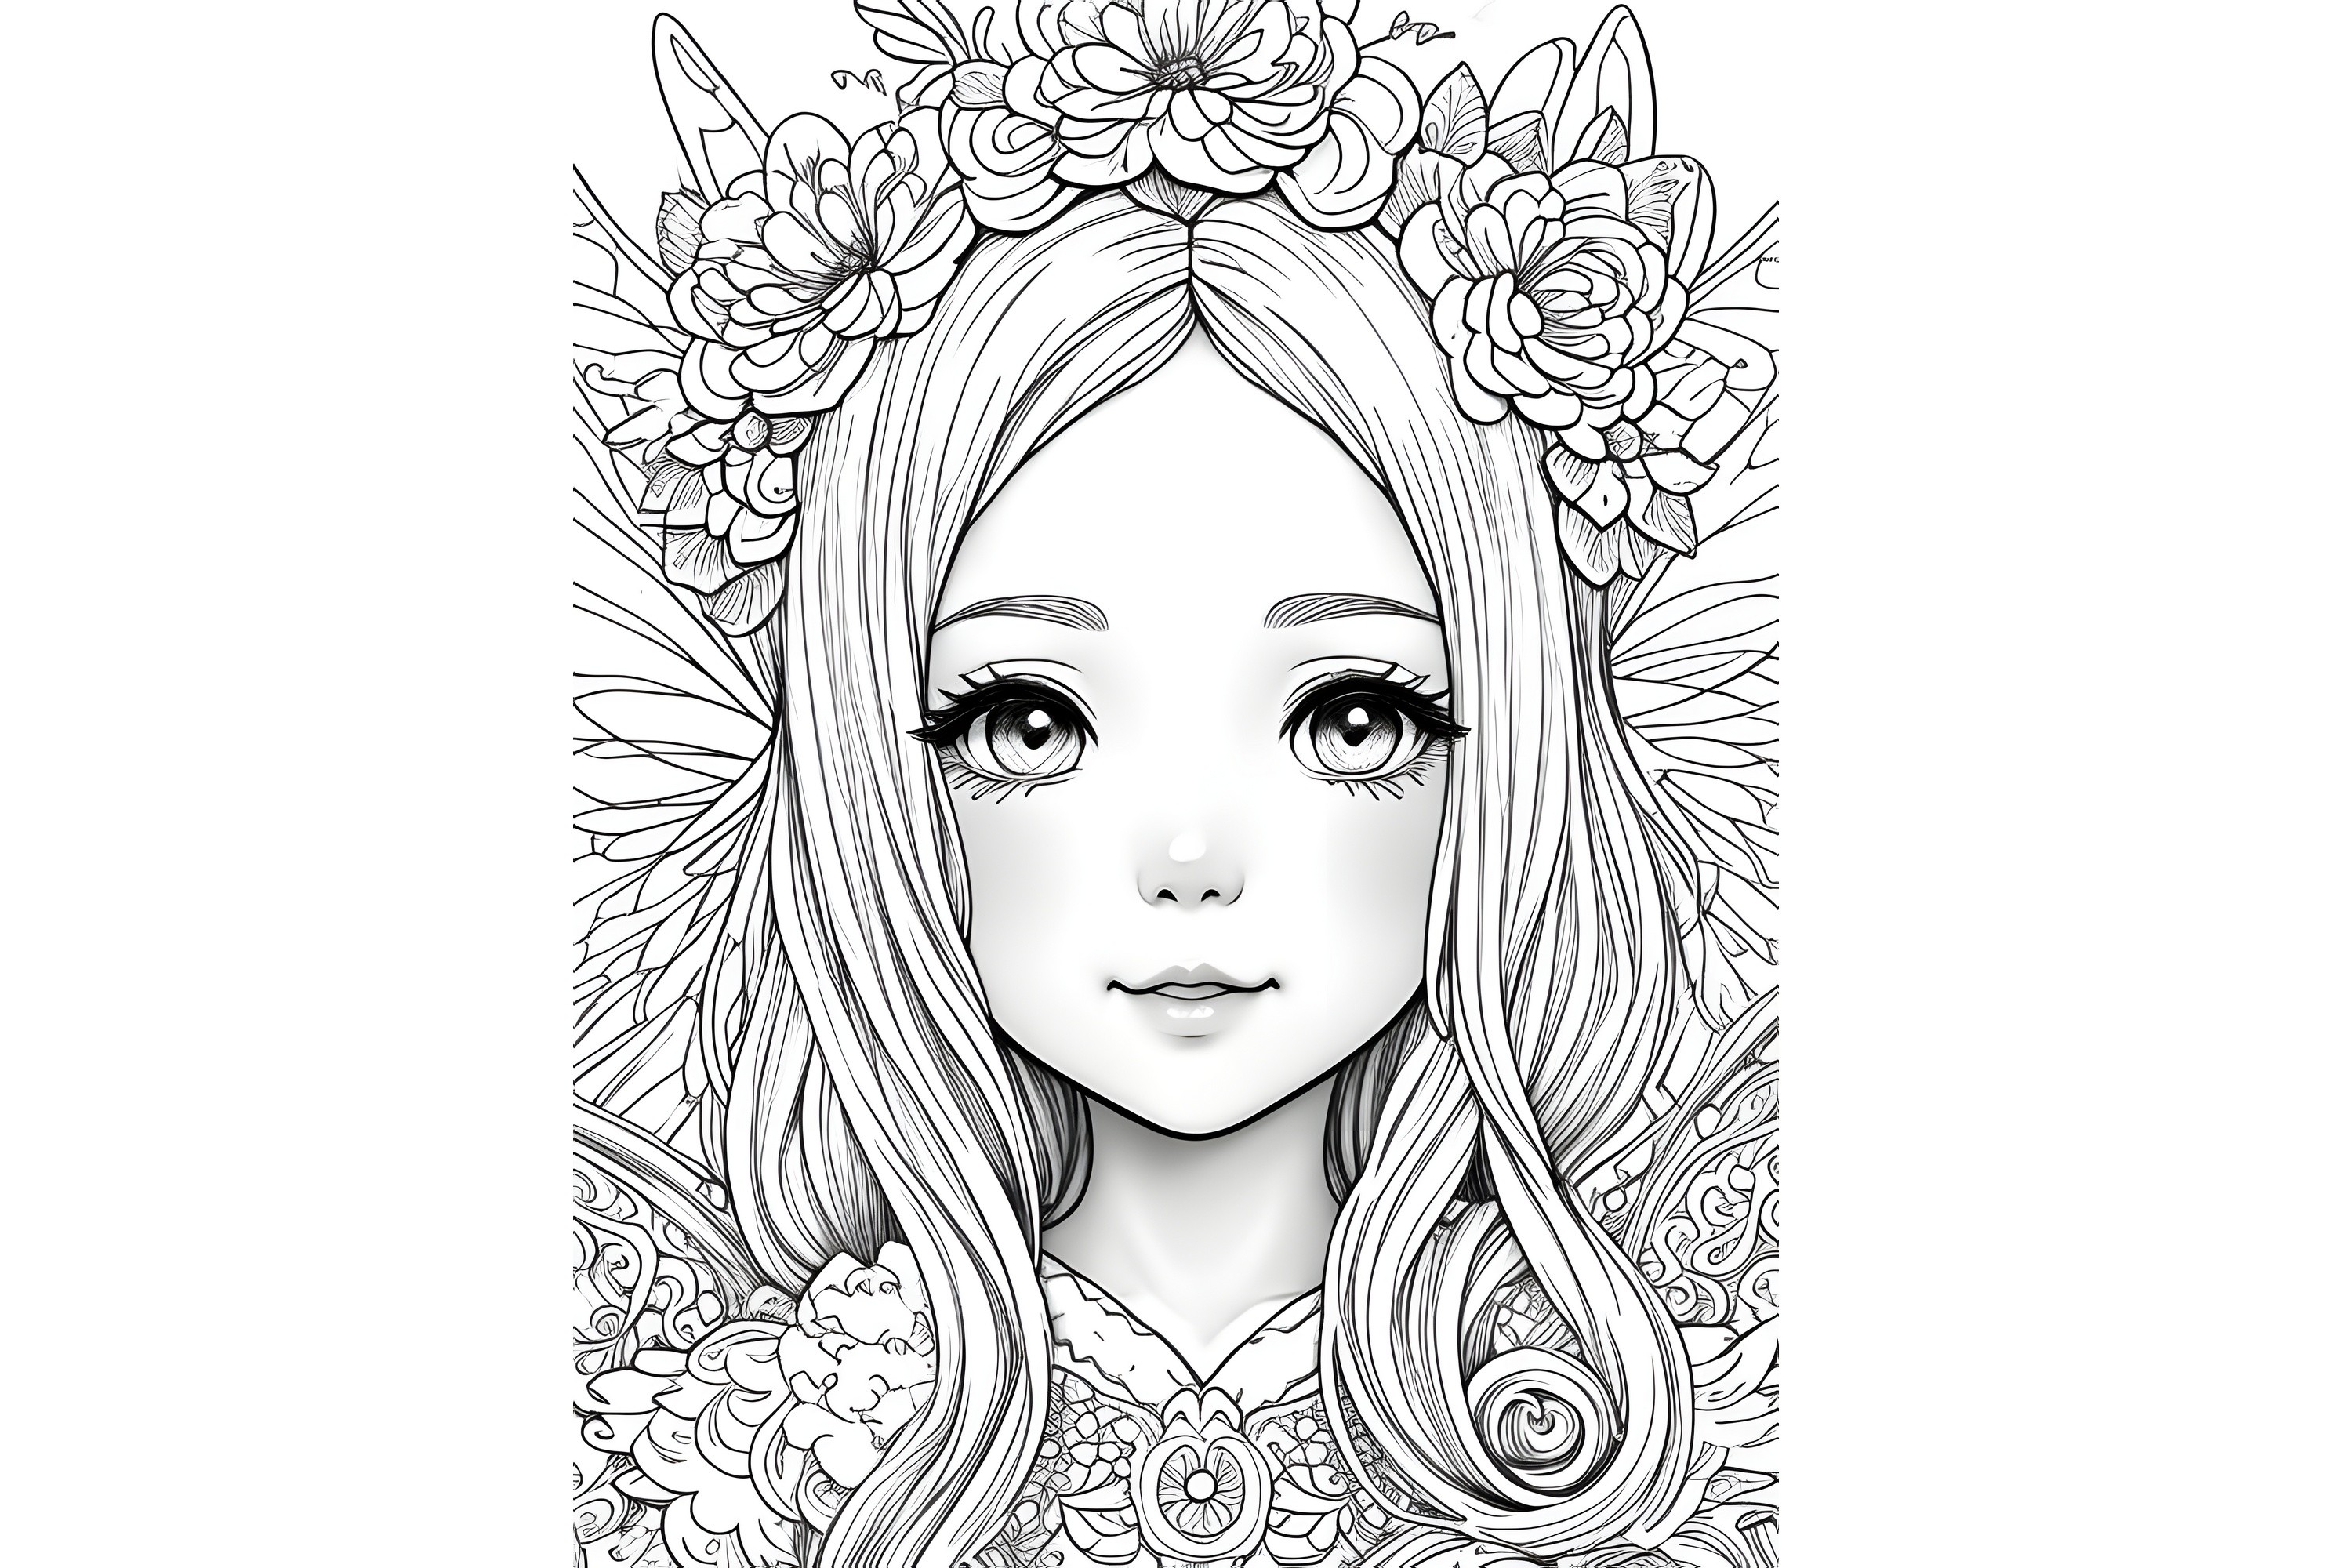 Woman Coloring Page for Adults Graphic by Craftable · Creative Fabrica